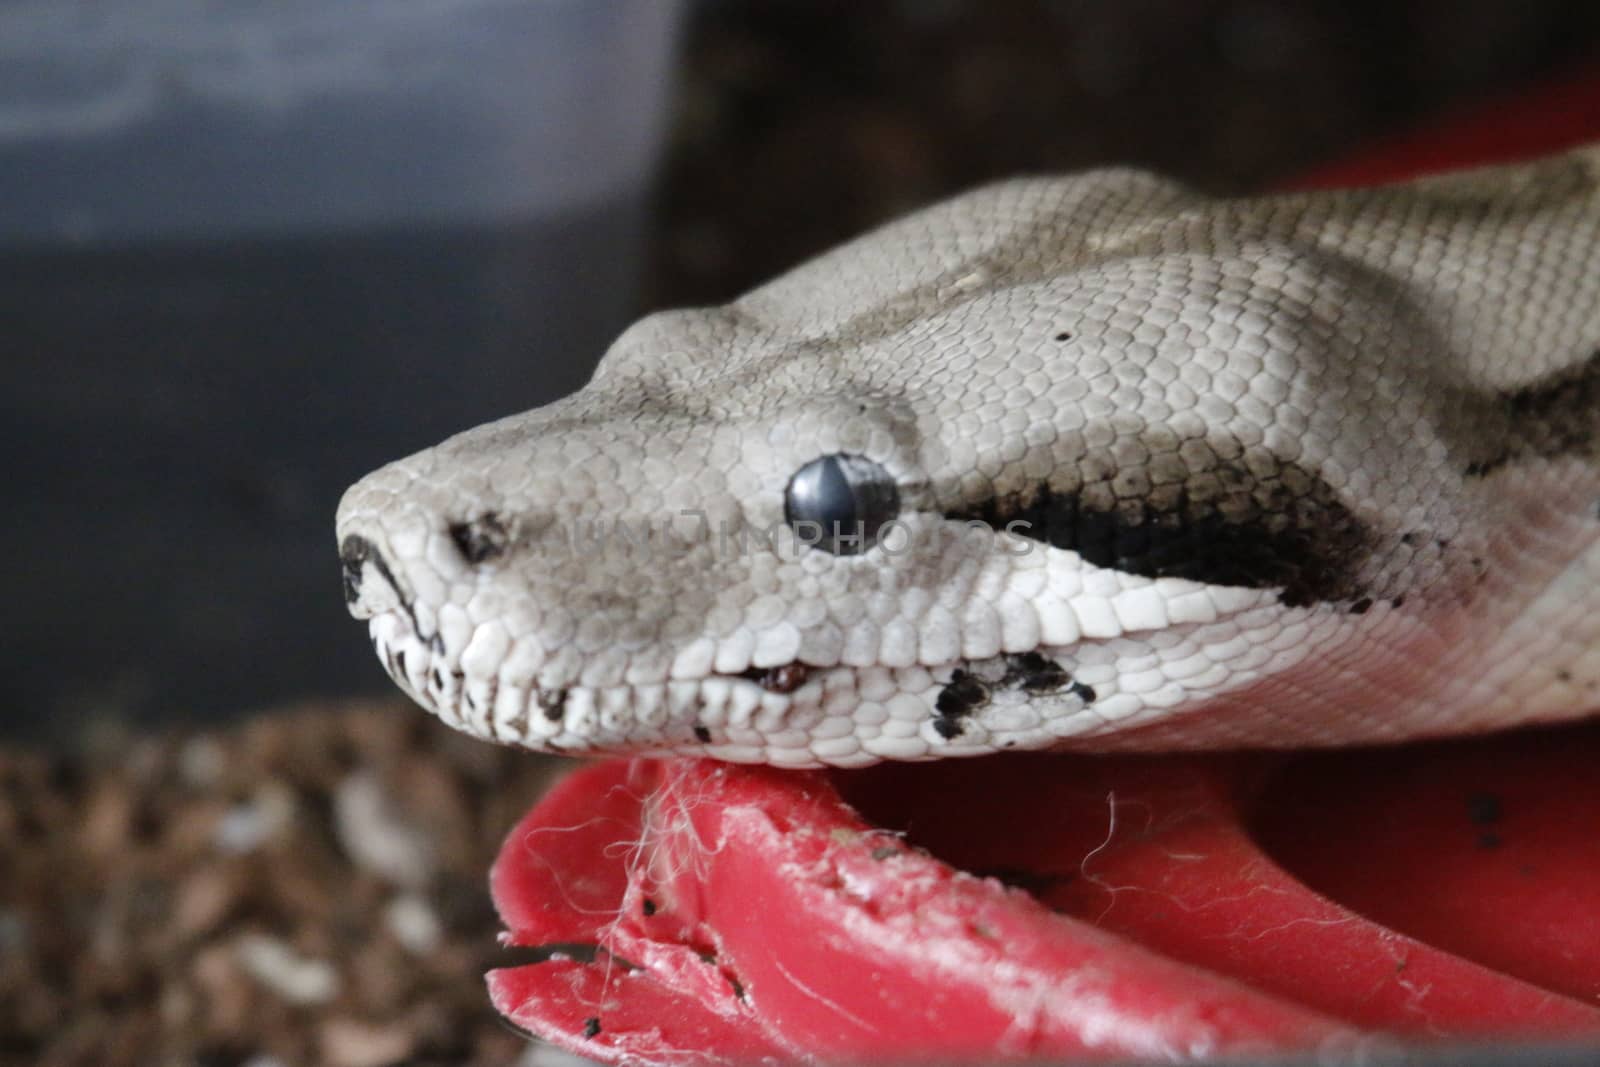 Boa Constrictor. Common Boa Constrictor found throughout Central America and Costa Rica.